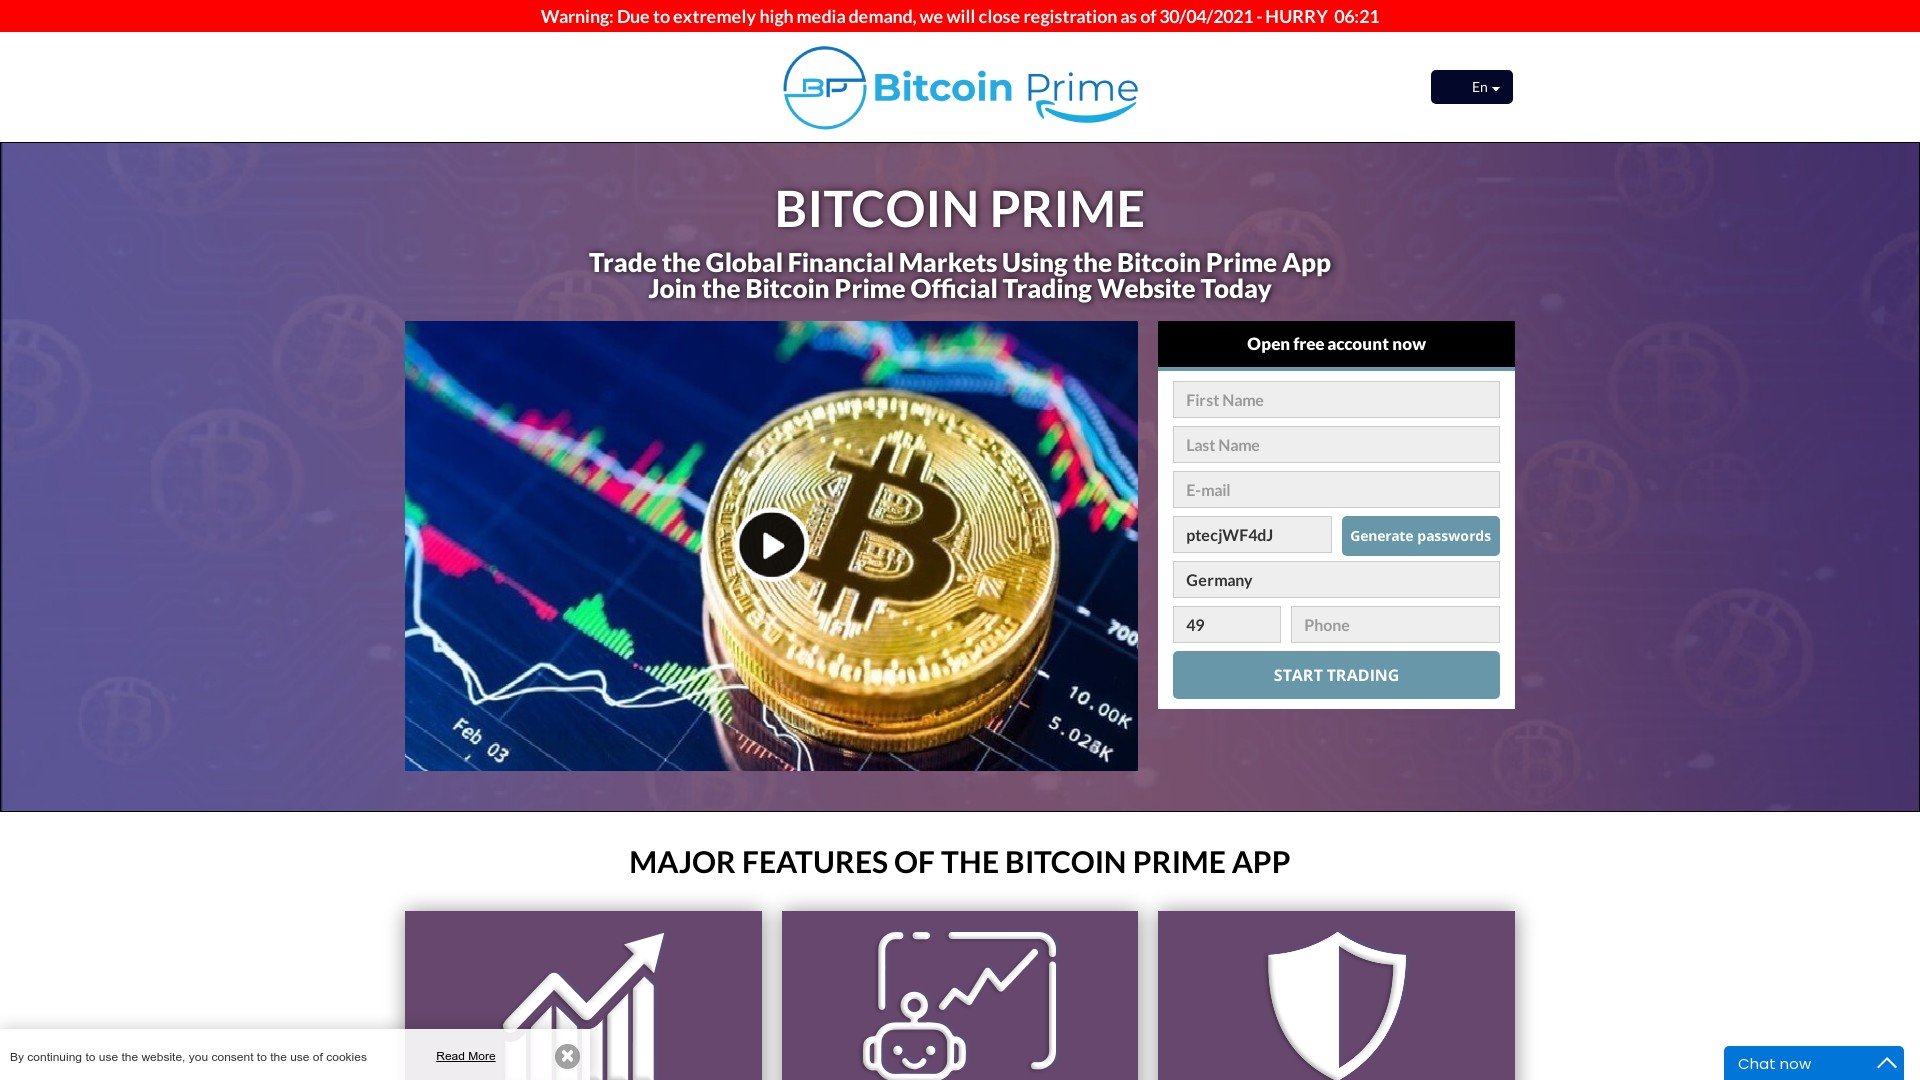 Is Bitcoin Prime a Scam Trading App?